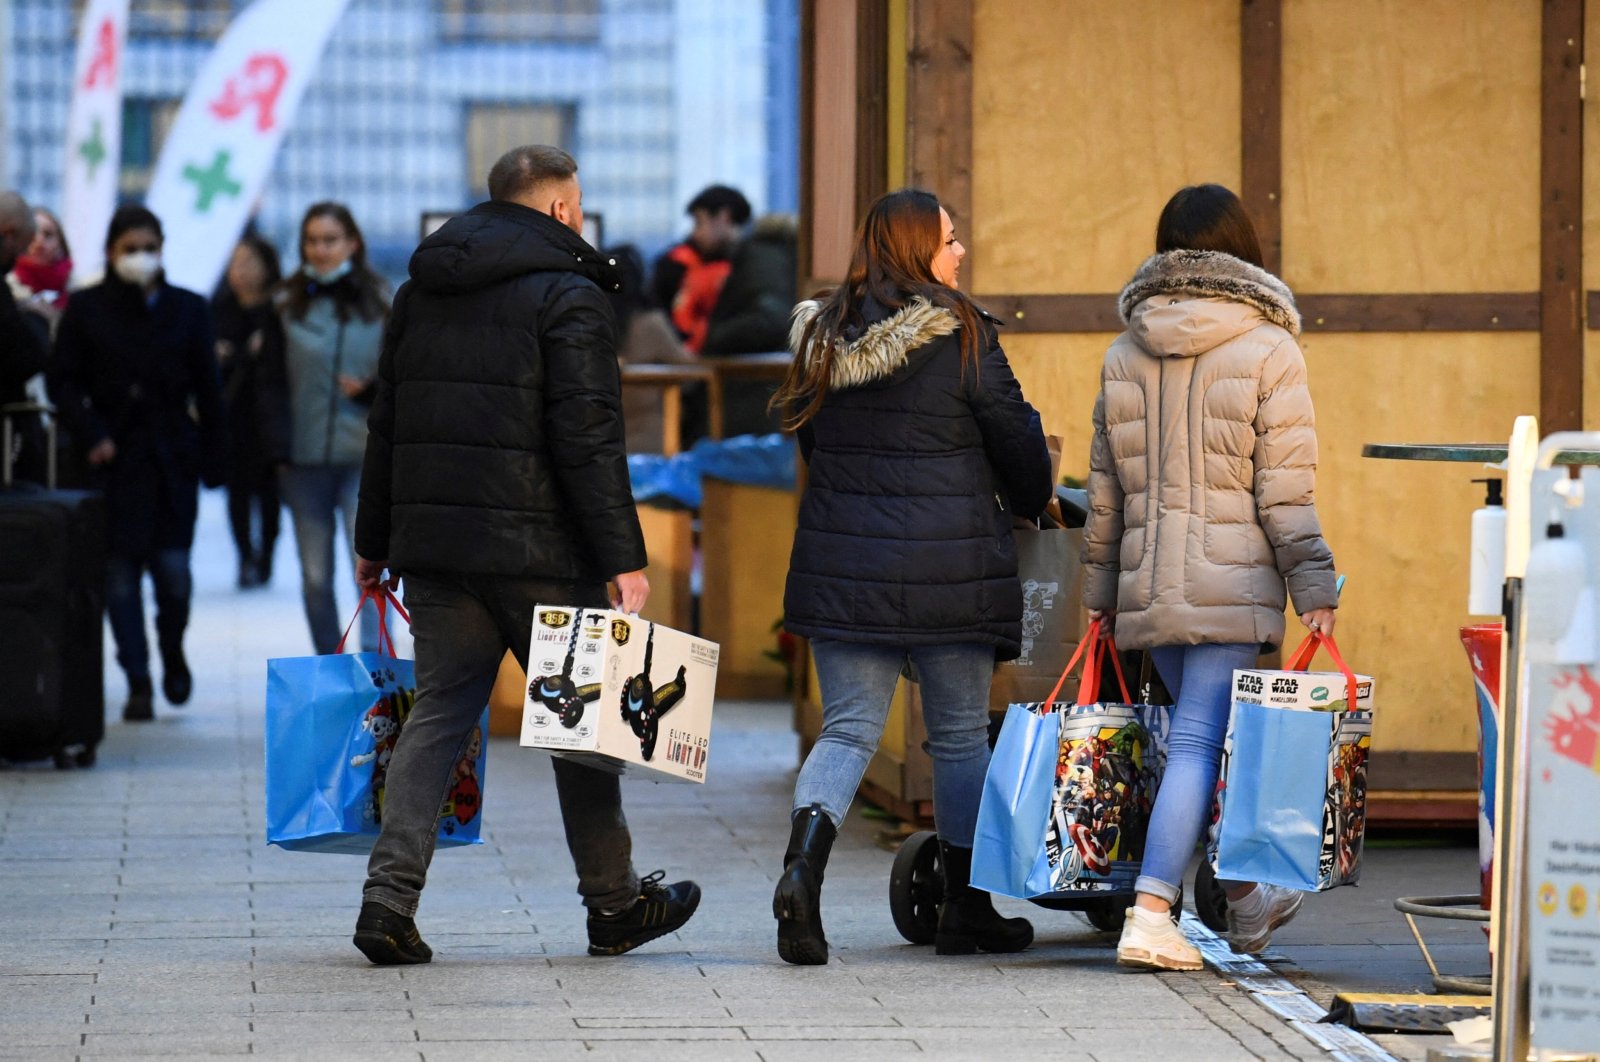 People with shopping bags walk near a shopping center in Berlin, Germany, Dec. 21, 2021. (Reuters Photo)